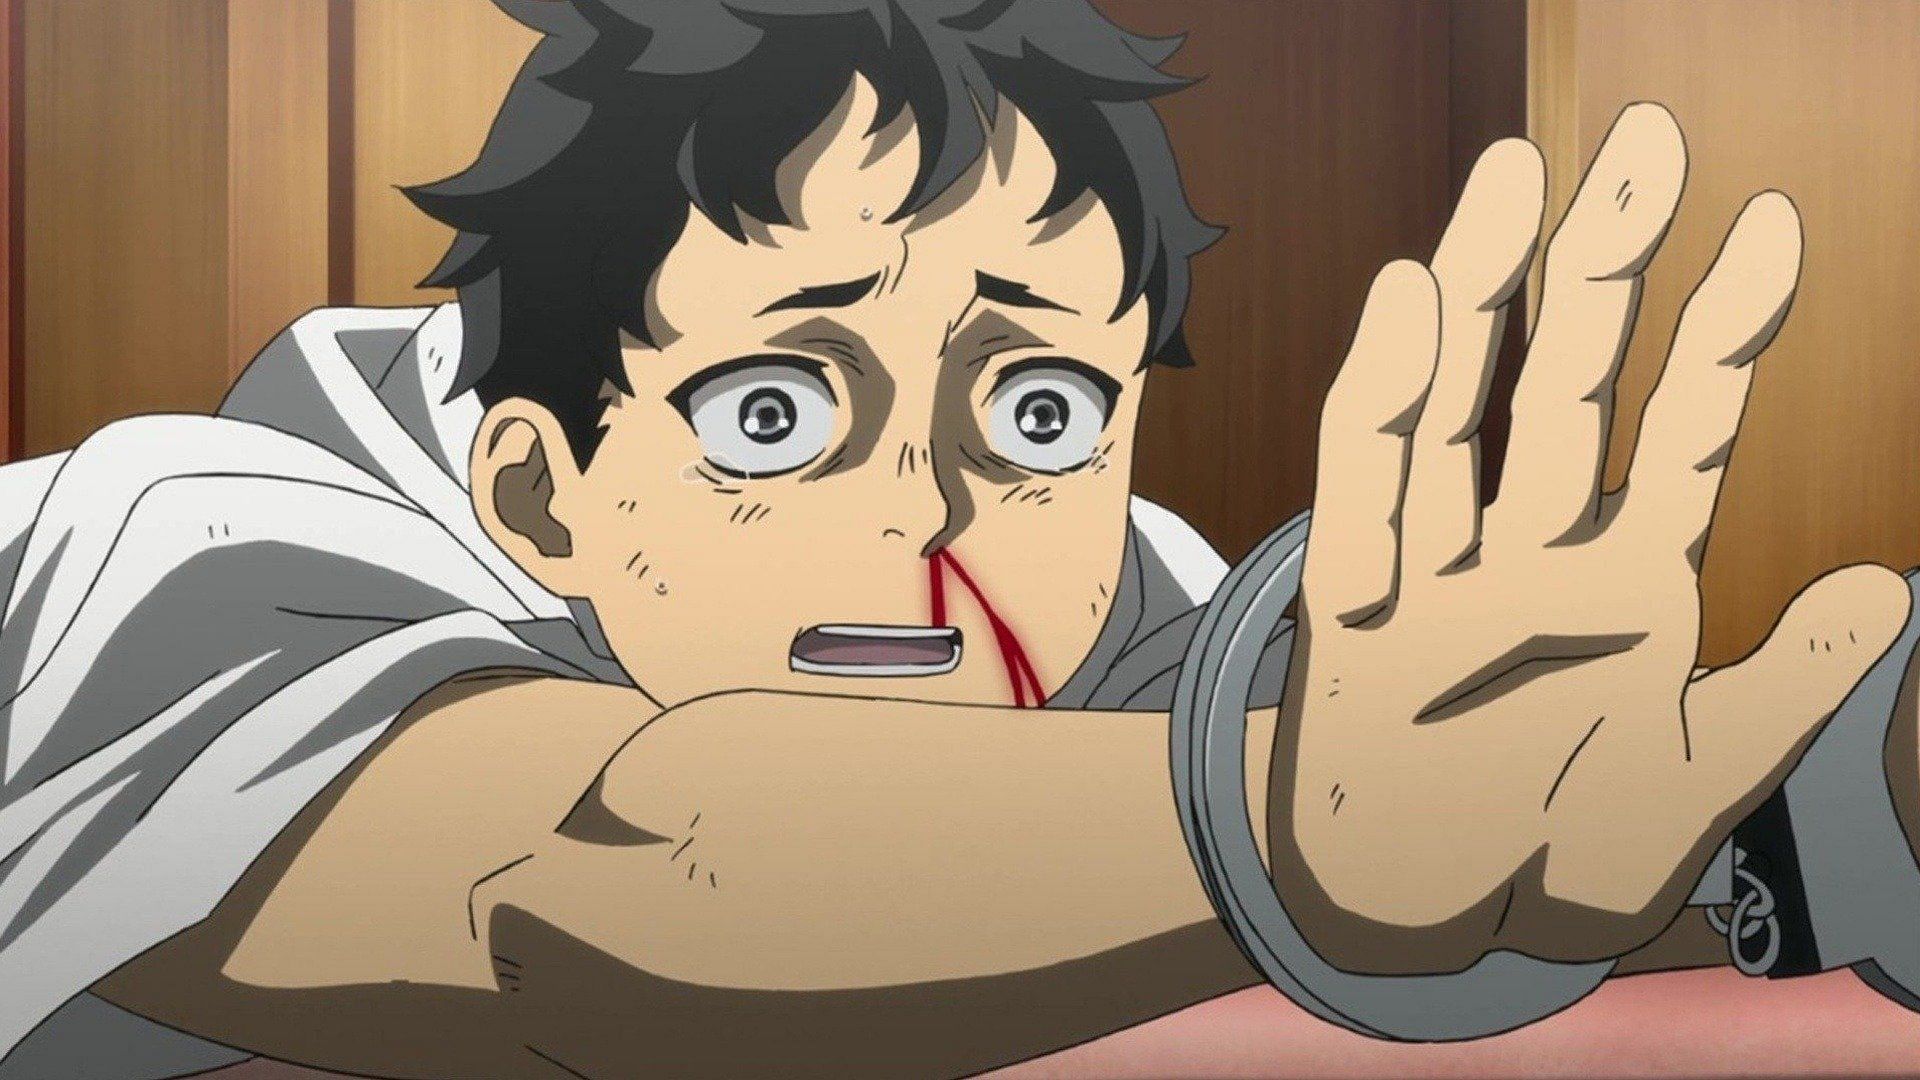 The new era of ultraviolent anime is one Deadman Wonderland would feel right at home in (Image via Manglobe)